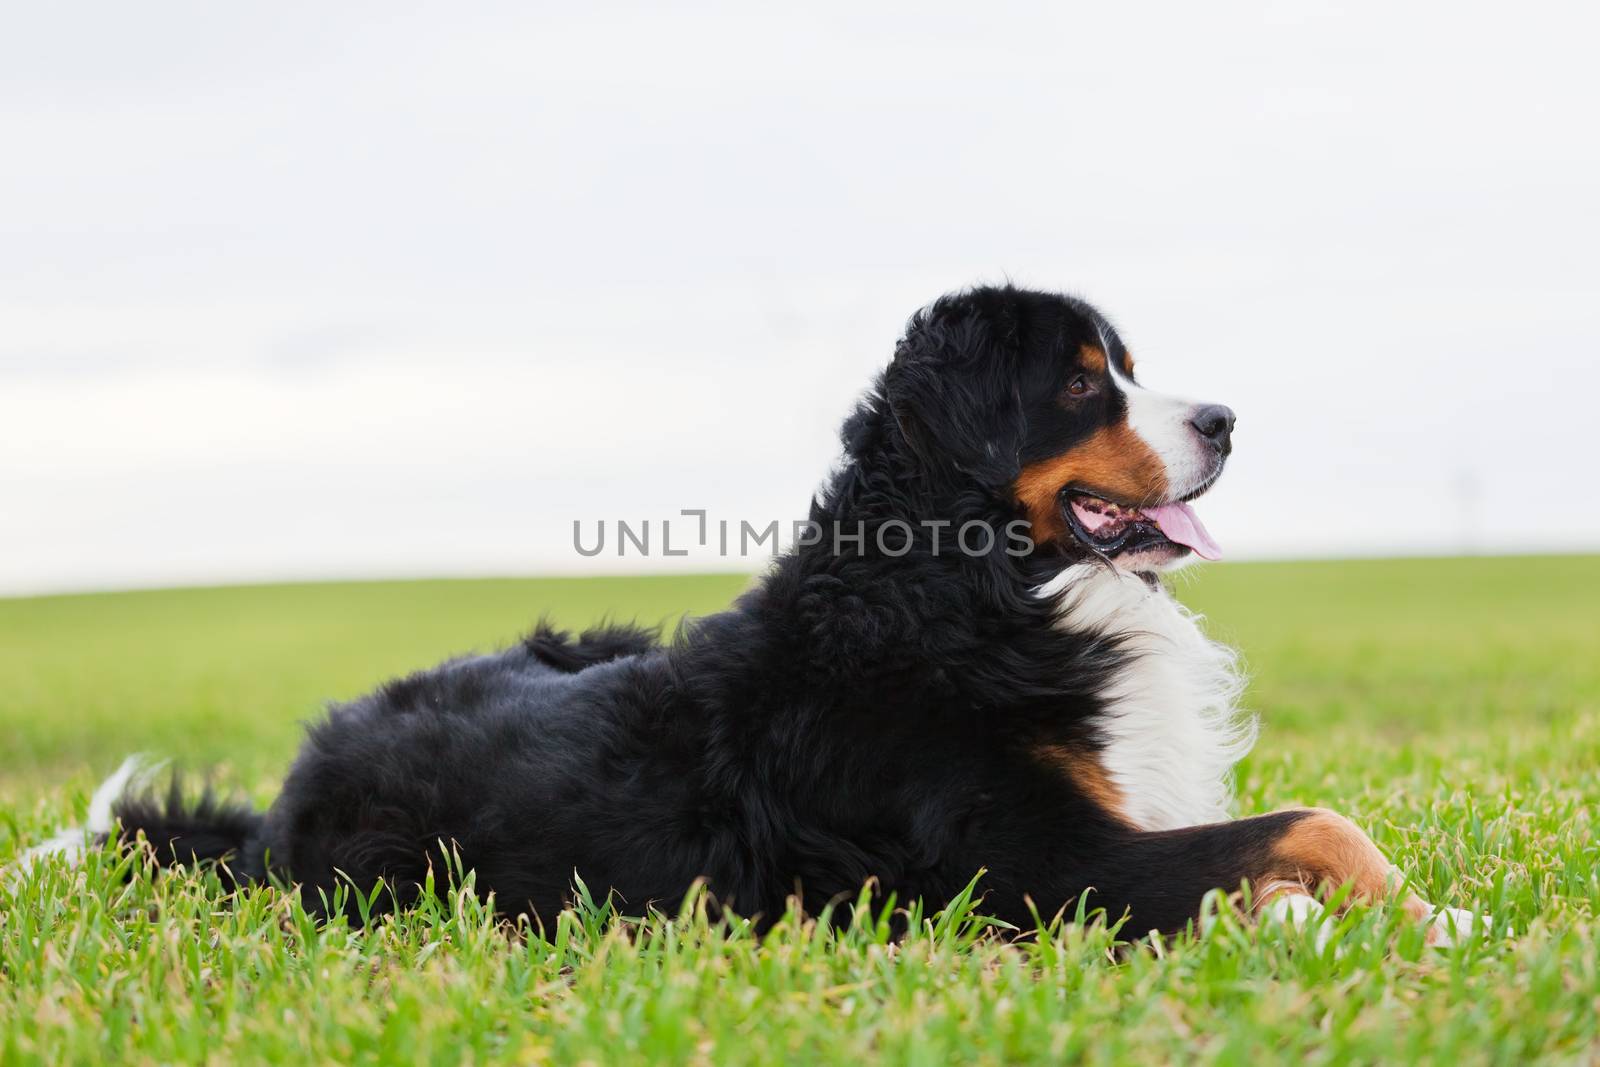 Bernese Mountain Dog lying on grass. Adult, purebred. Full body view